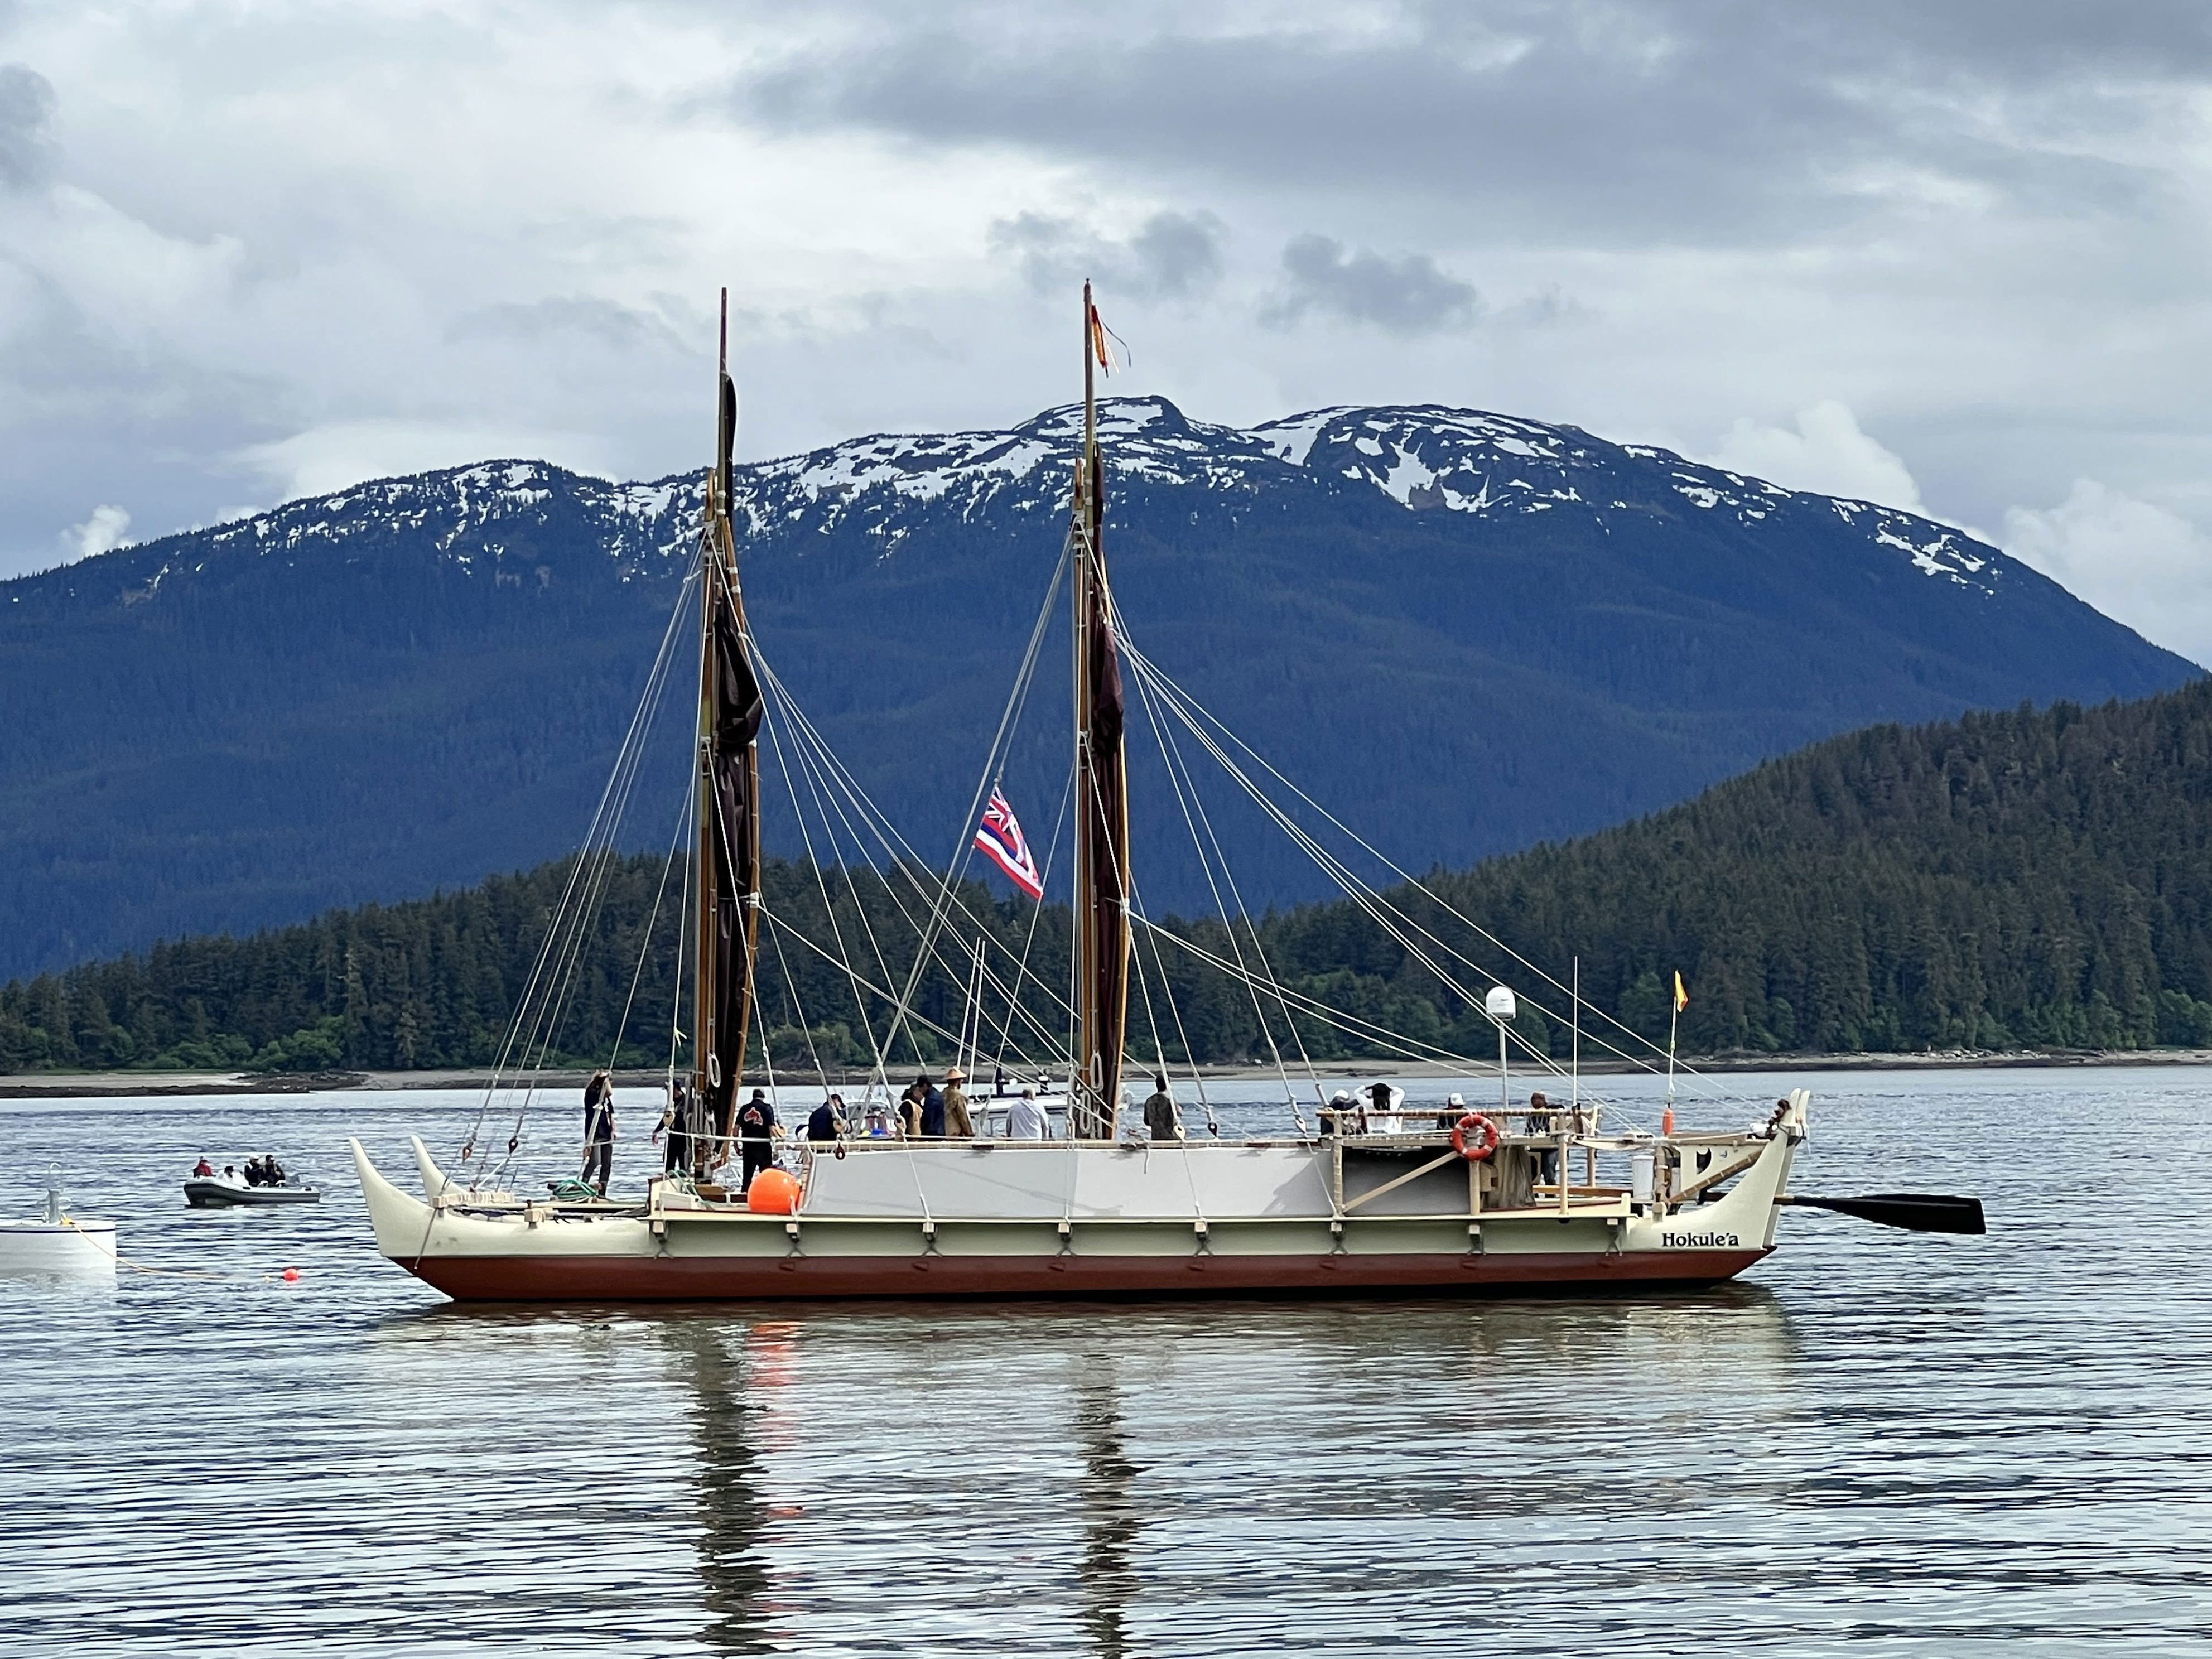 After pause in wake of wildfires, Hokulea to restart Pacific-wide ...